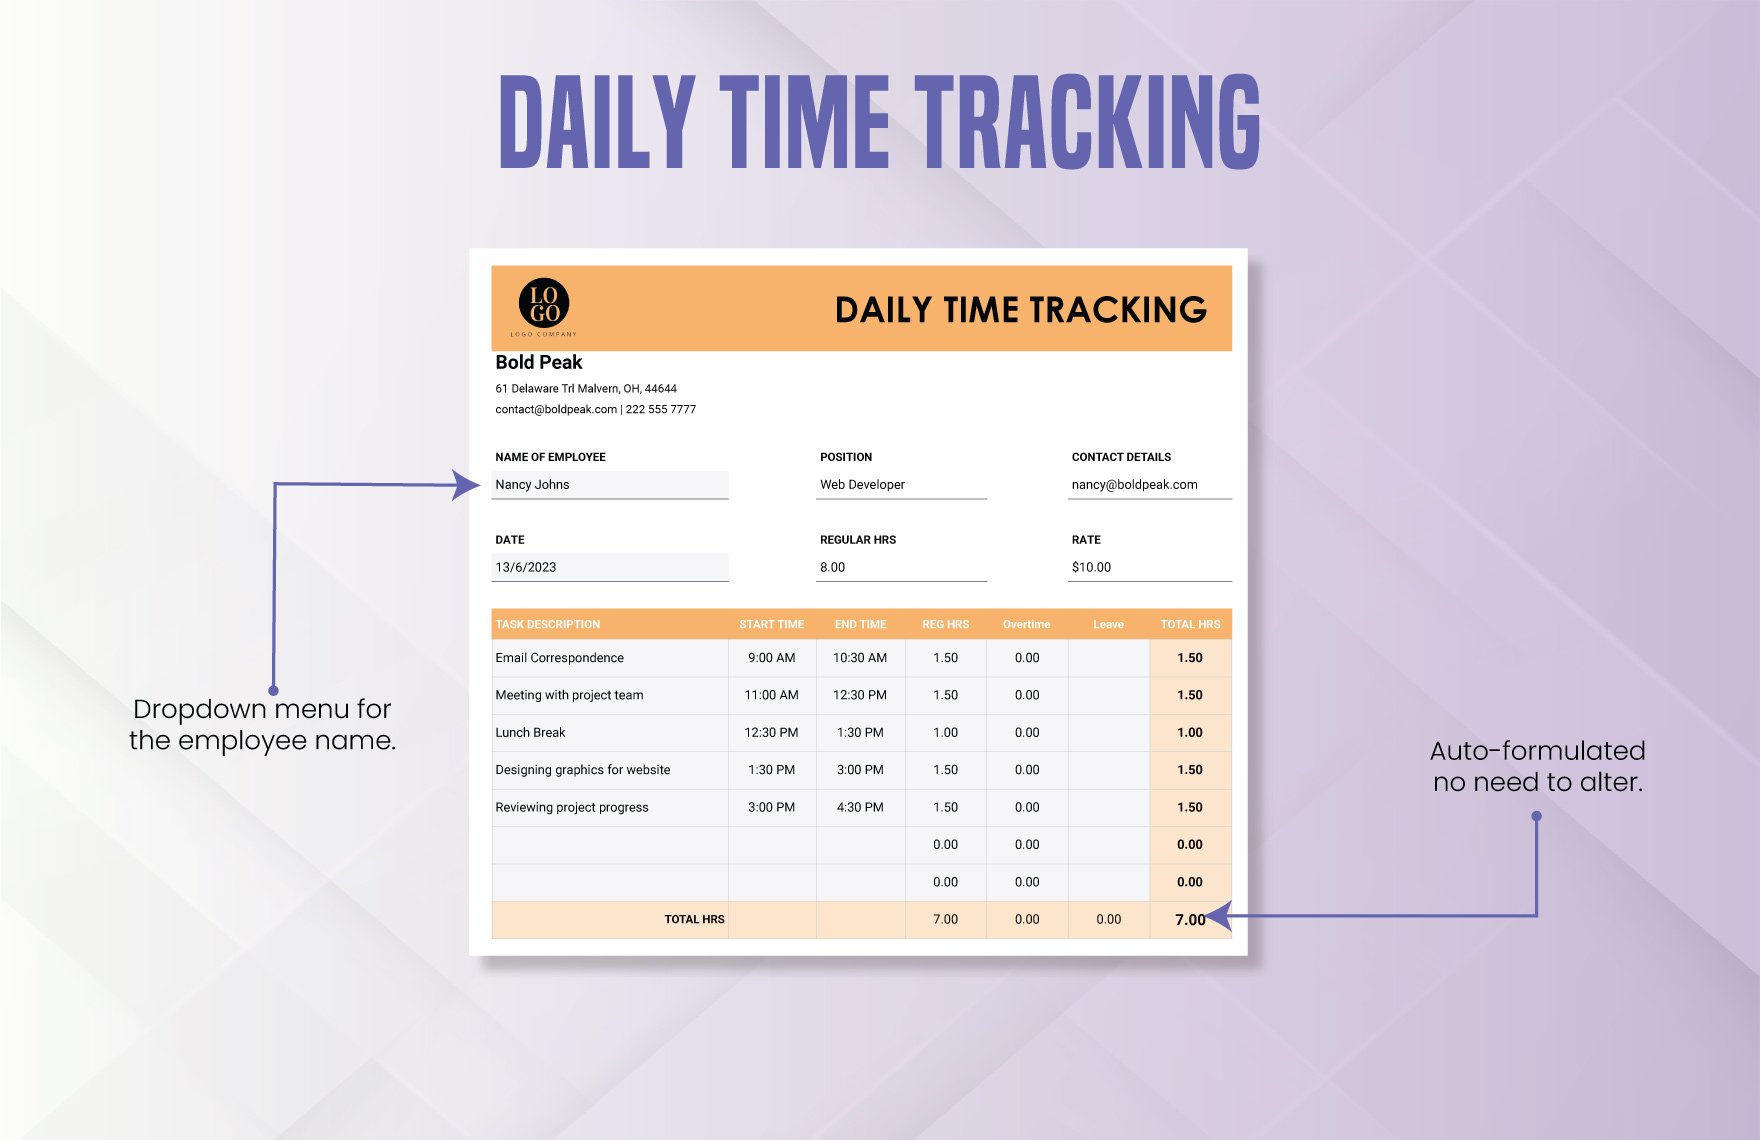 Daily Time Tracking Template